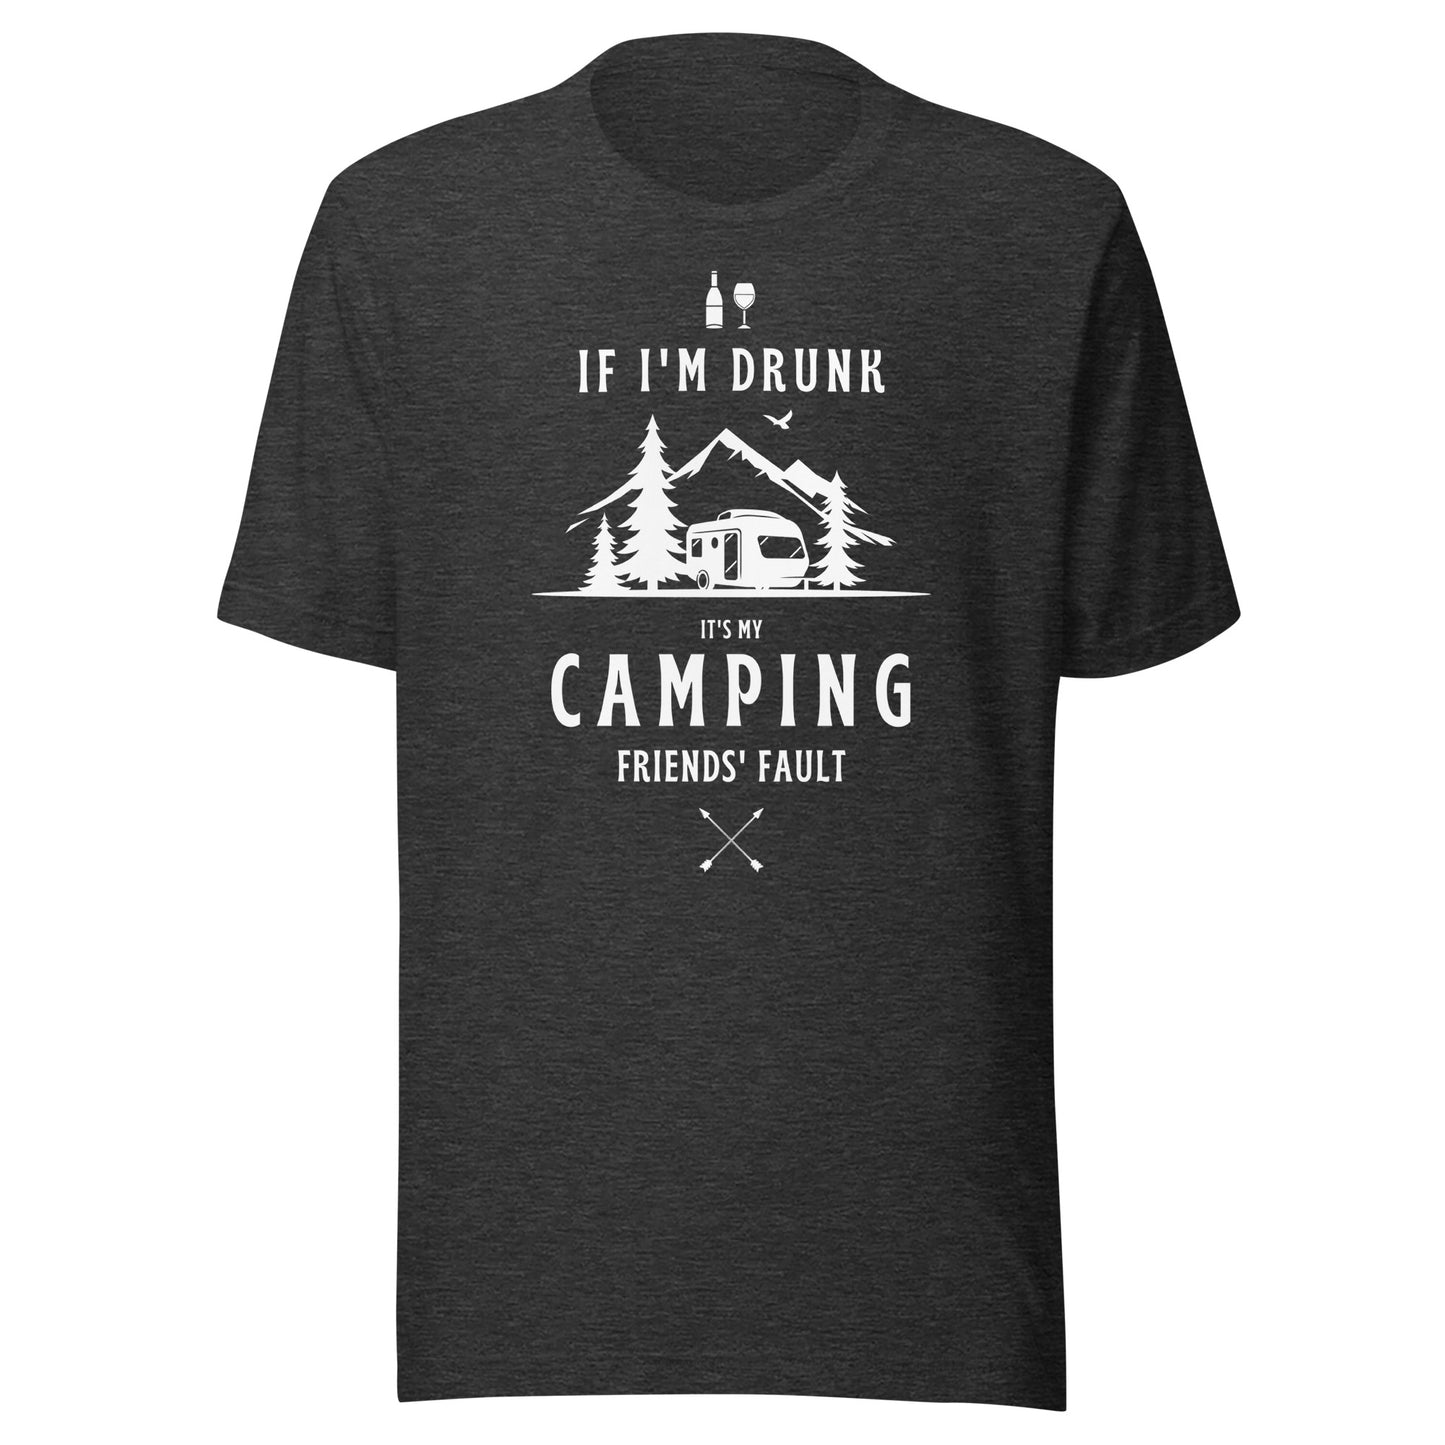 Unisex t-shirt 'If I'm drunk, it's my camping friends fault'